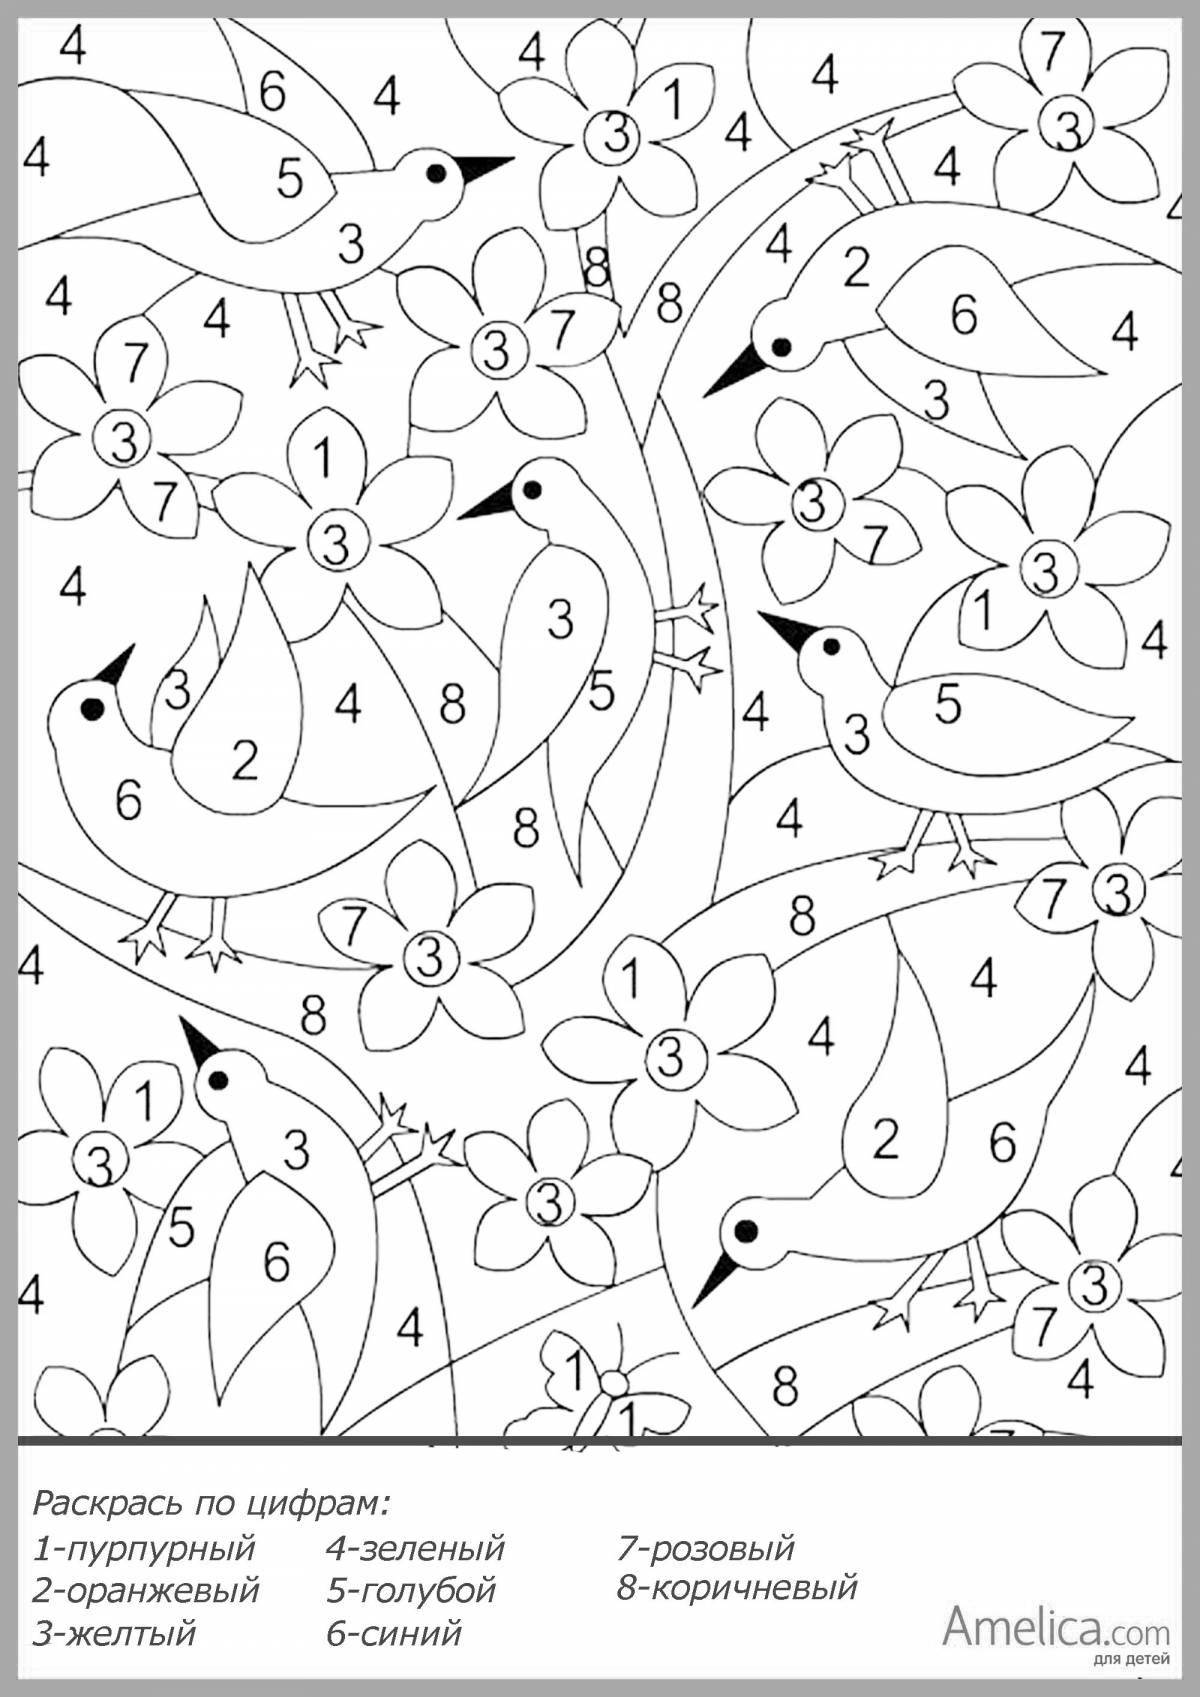 Adorable coloring book for kids with colored numbers